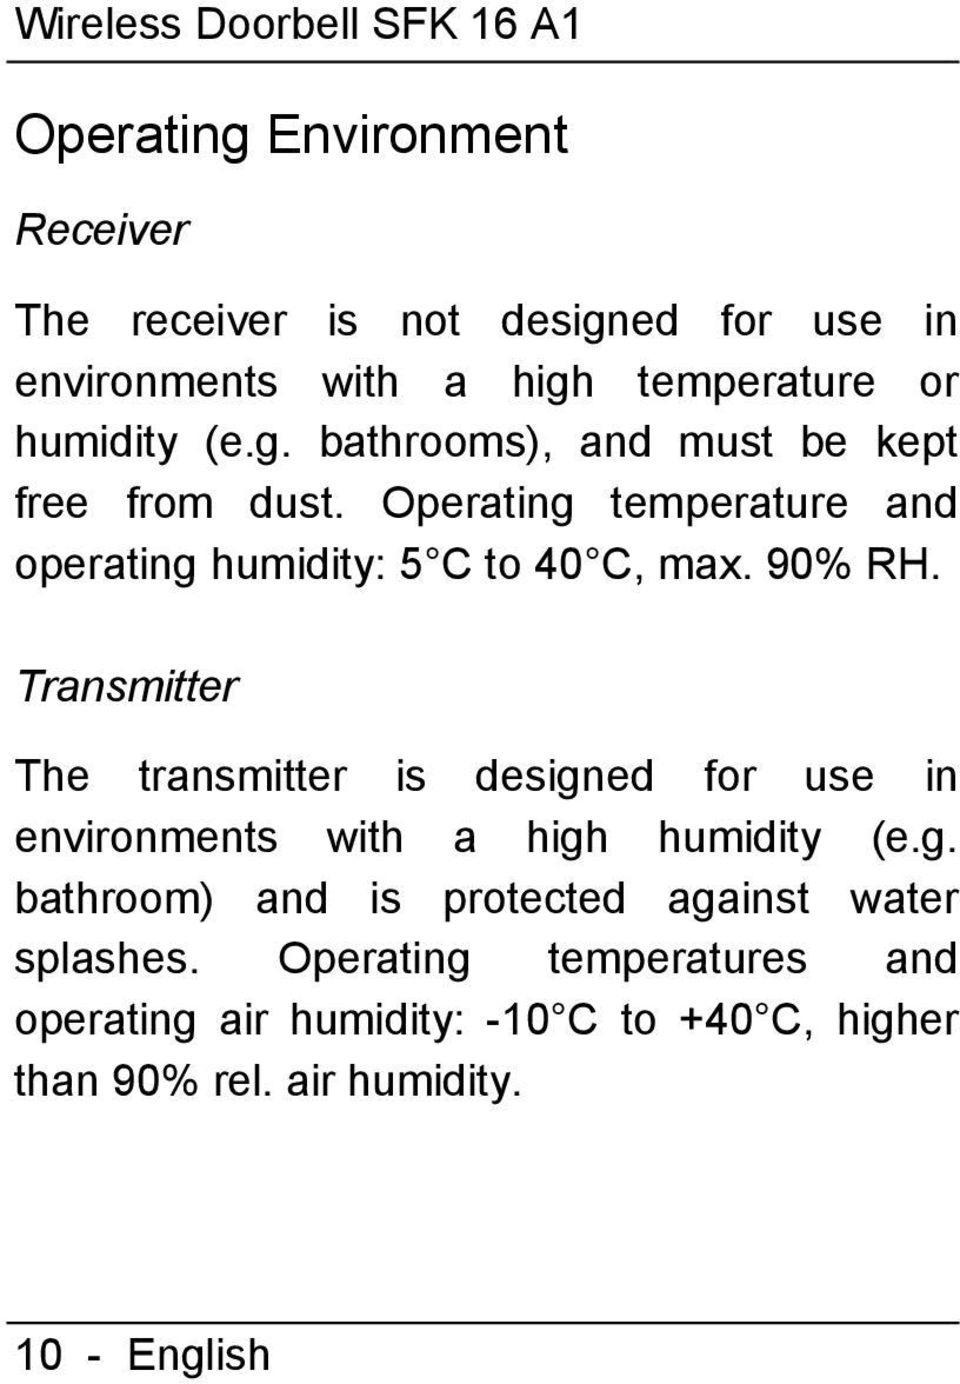 Operating temperature and operating humidity: 5 C to 40 C, max. 90% RH.